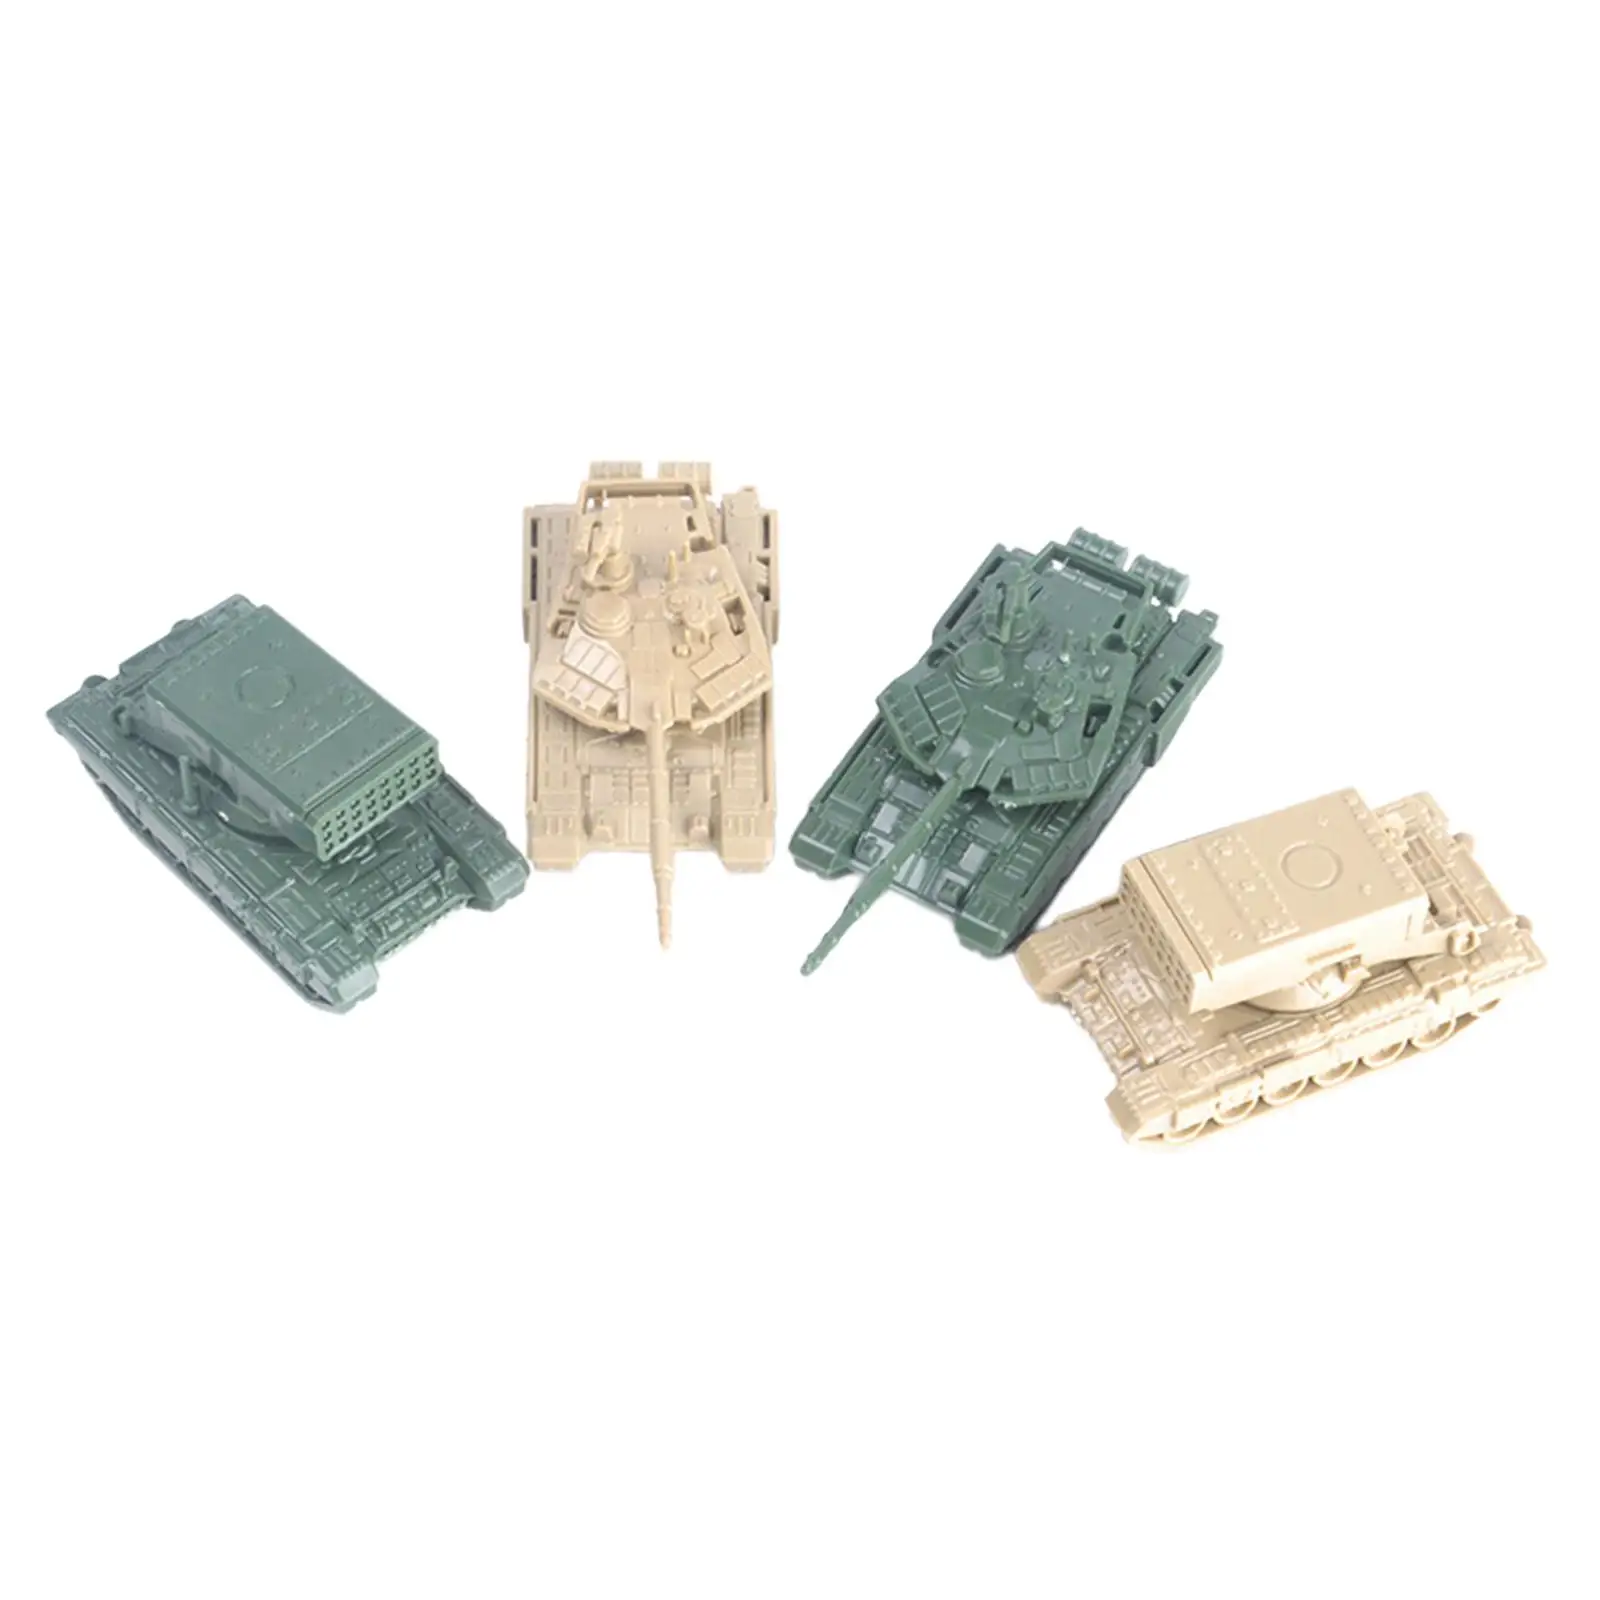 4x Armored Tank Model 1/144 Craft Miniature Tank Puzzle Tracked Crawler Chariot for Adults Party Favors Collection Children Gift